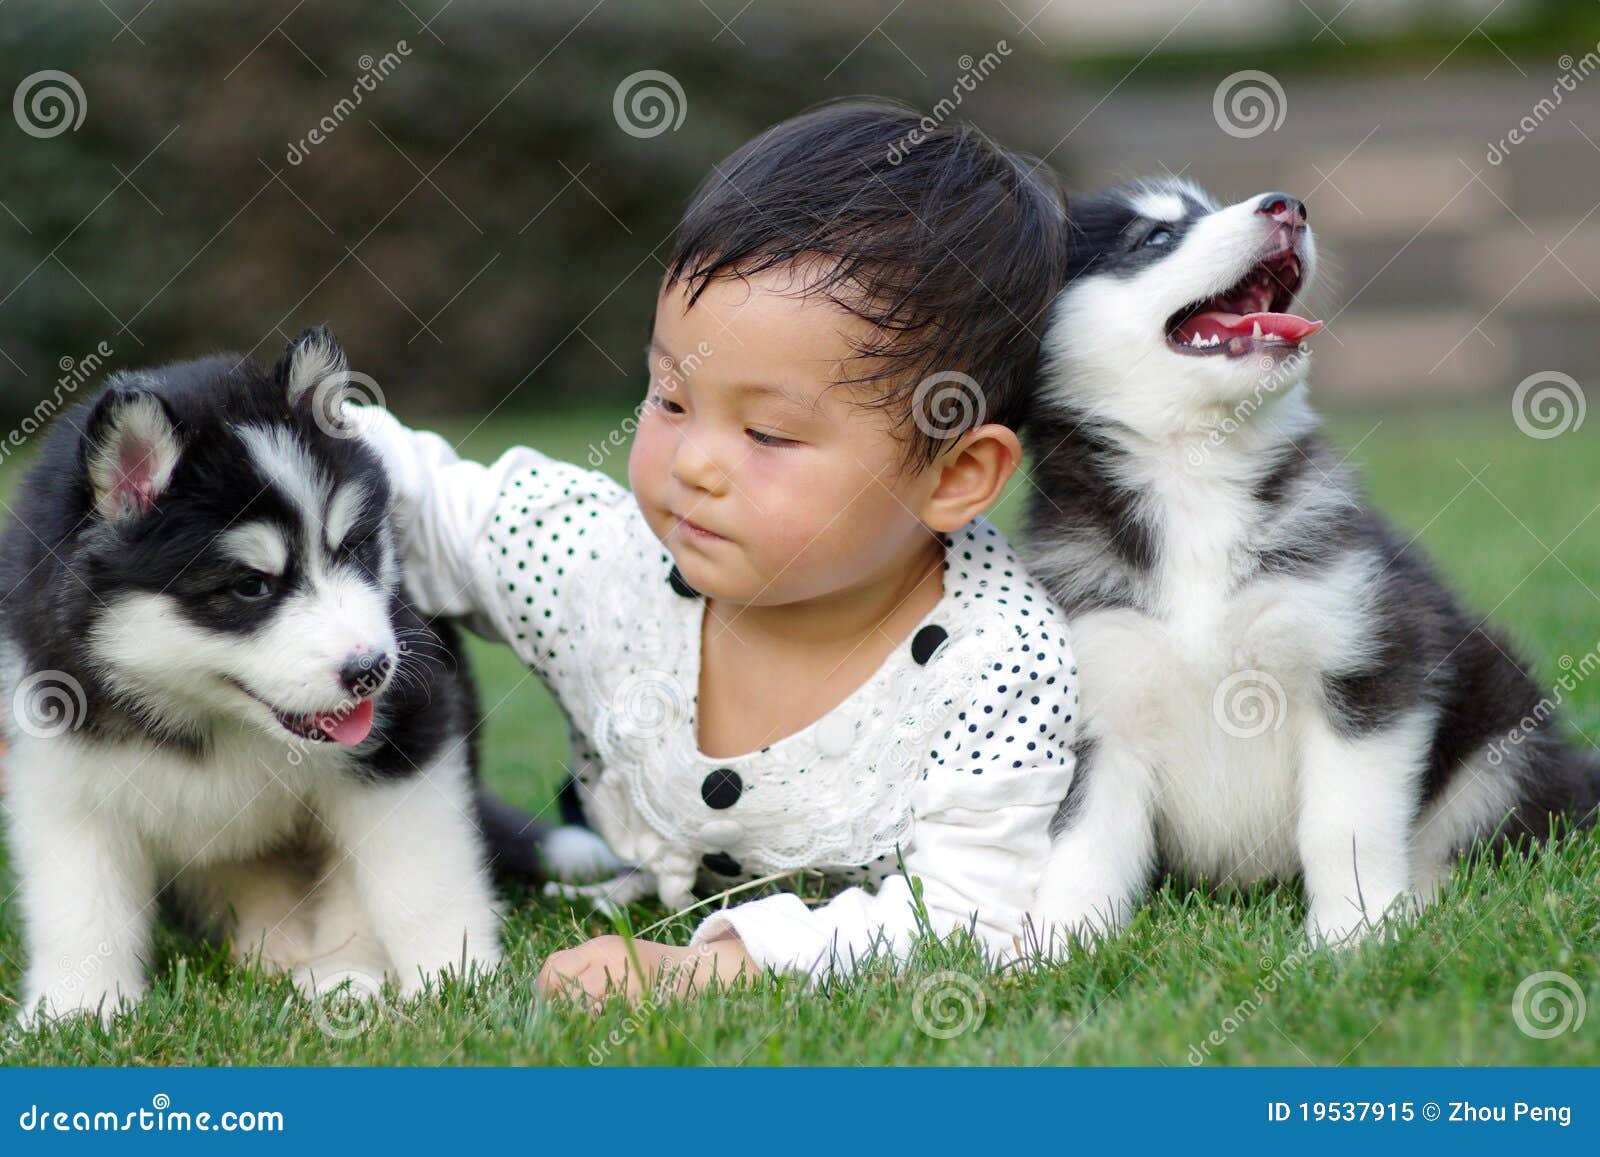 girl play with puppy